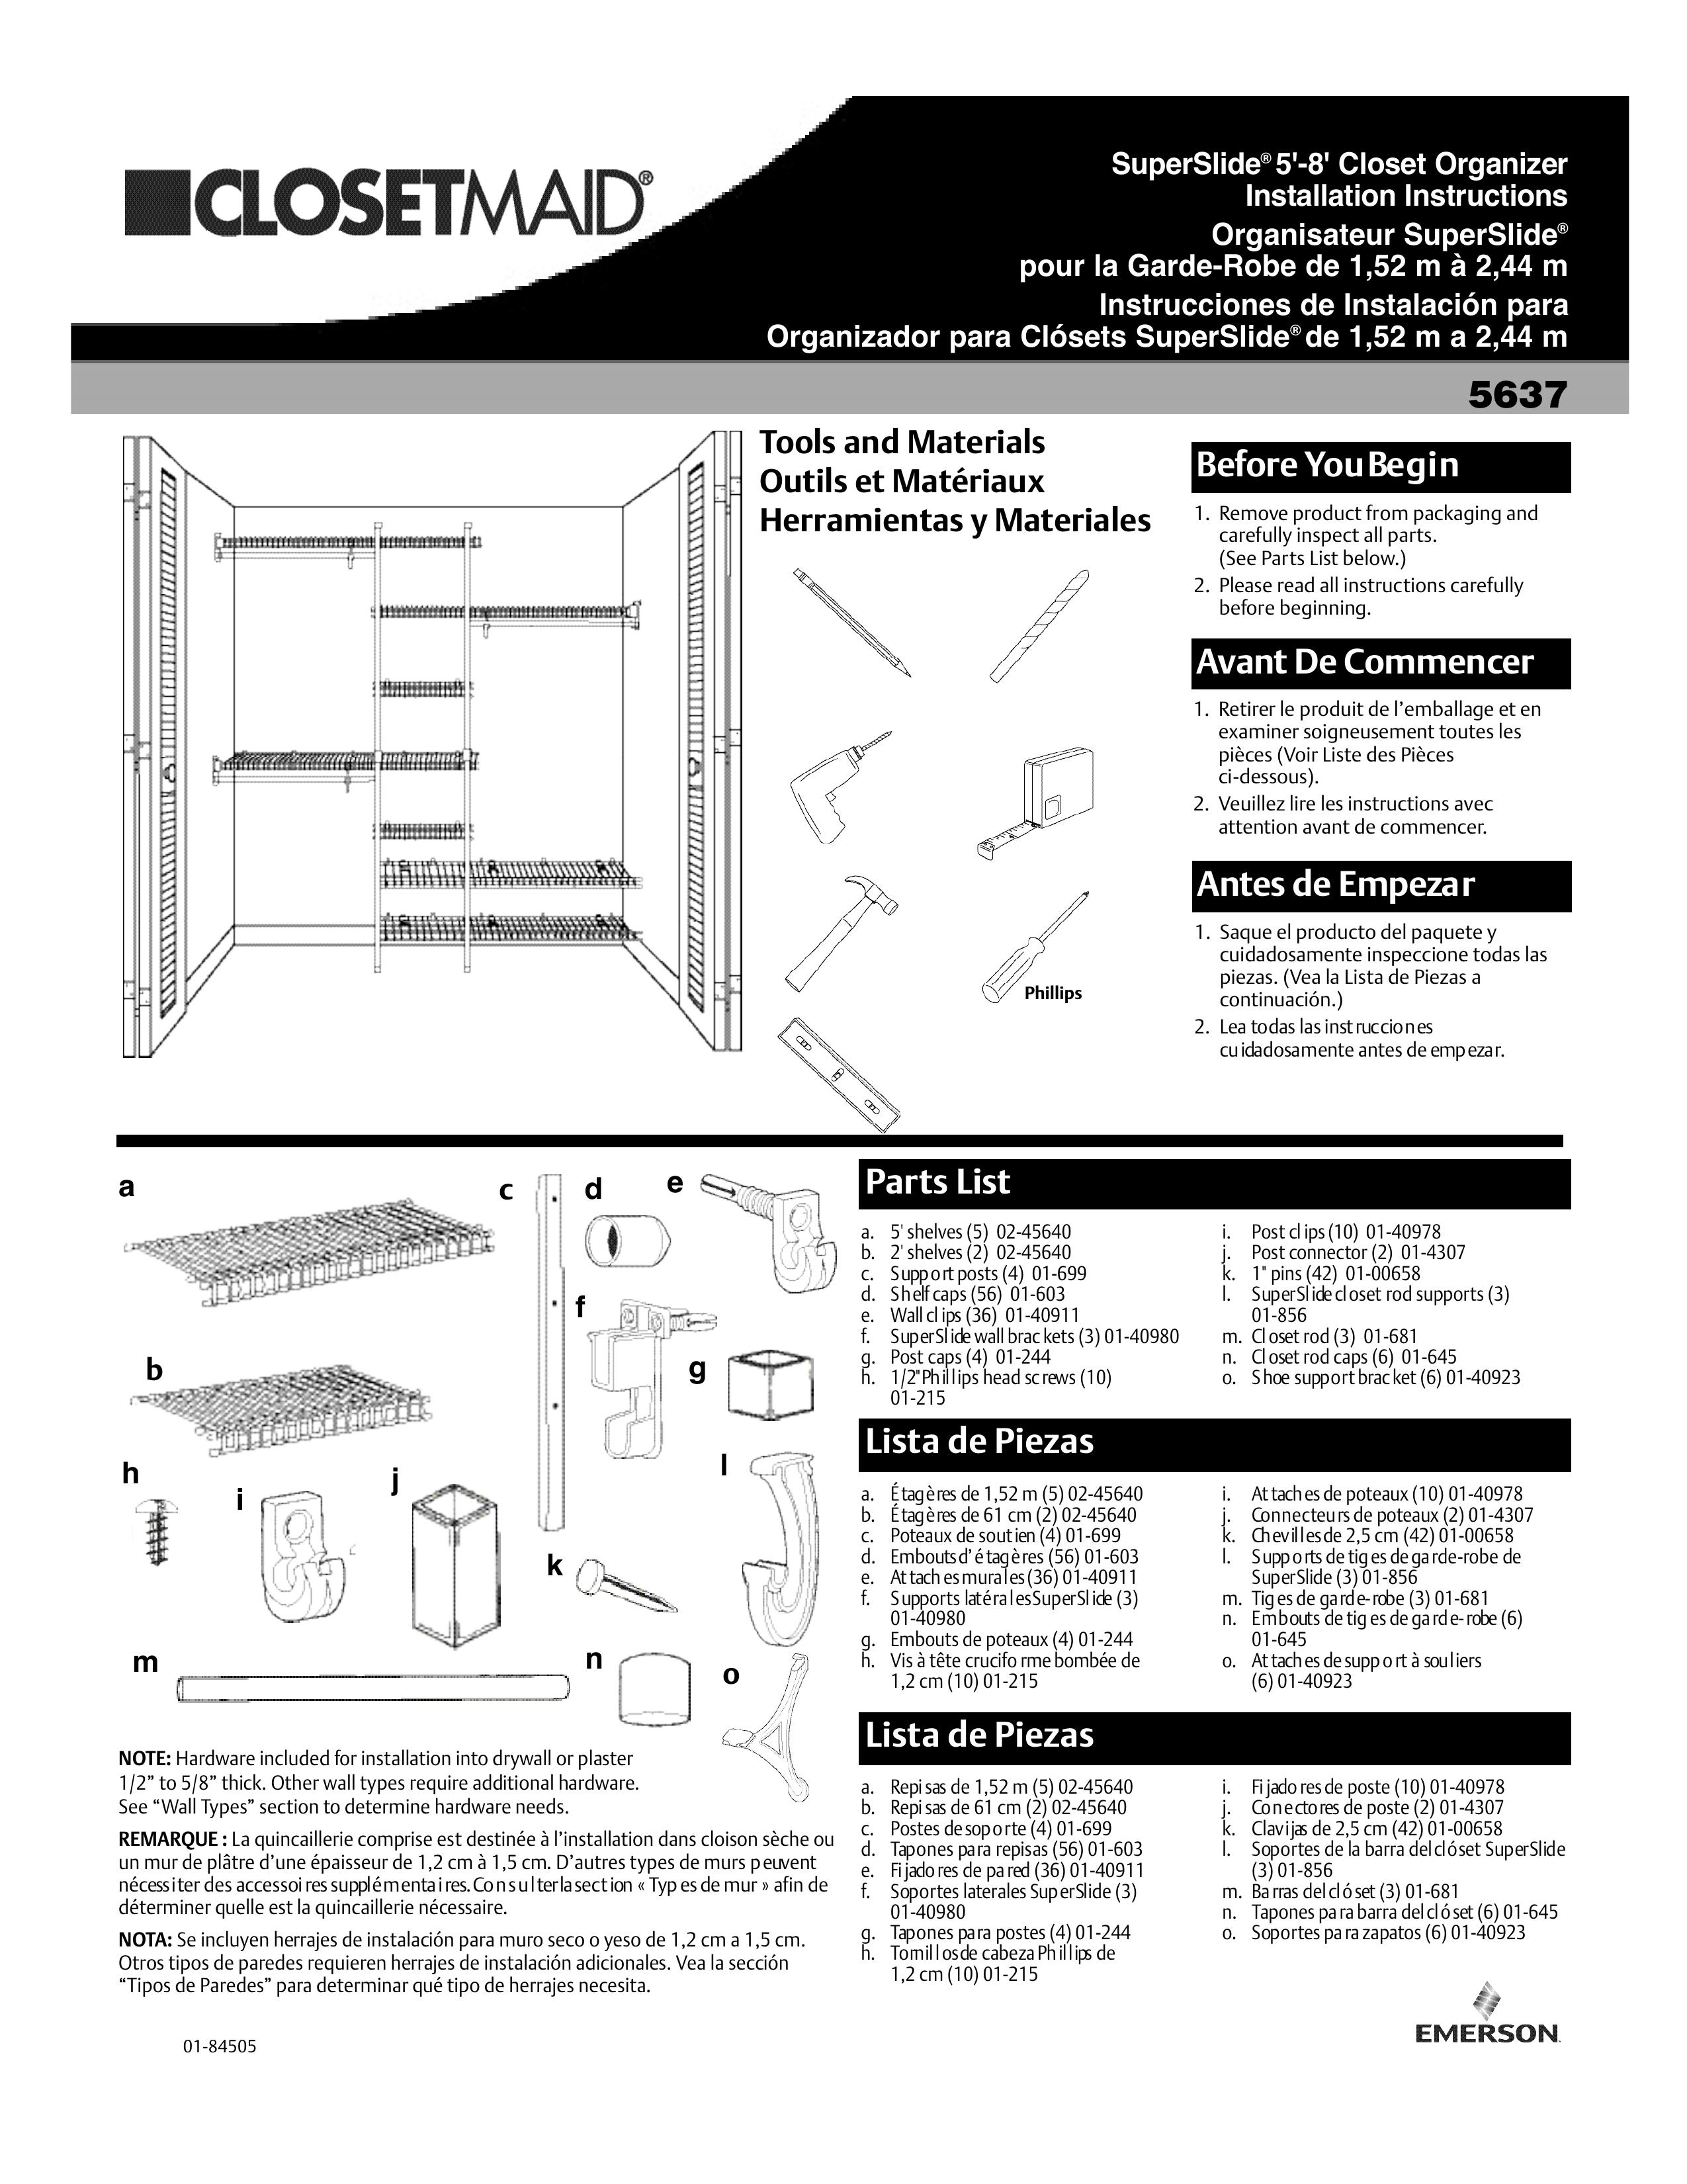 Emerson 5637 Outdoor Storage User Manual